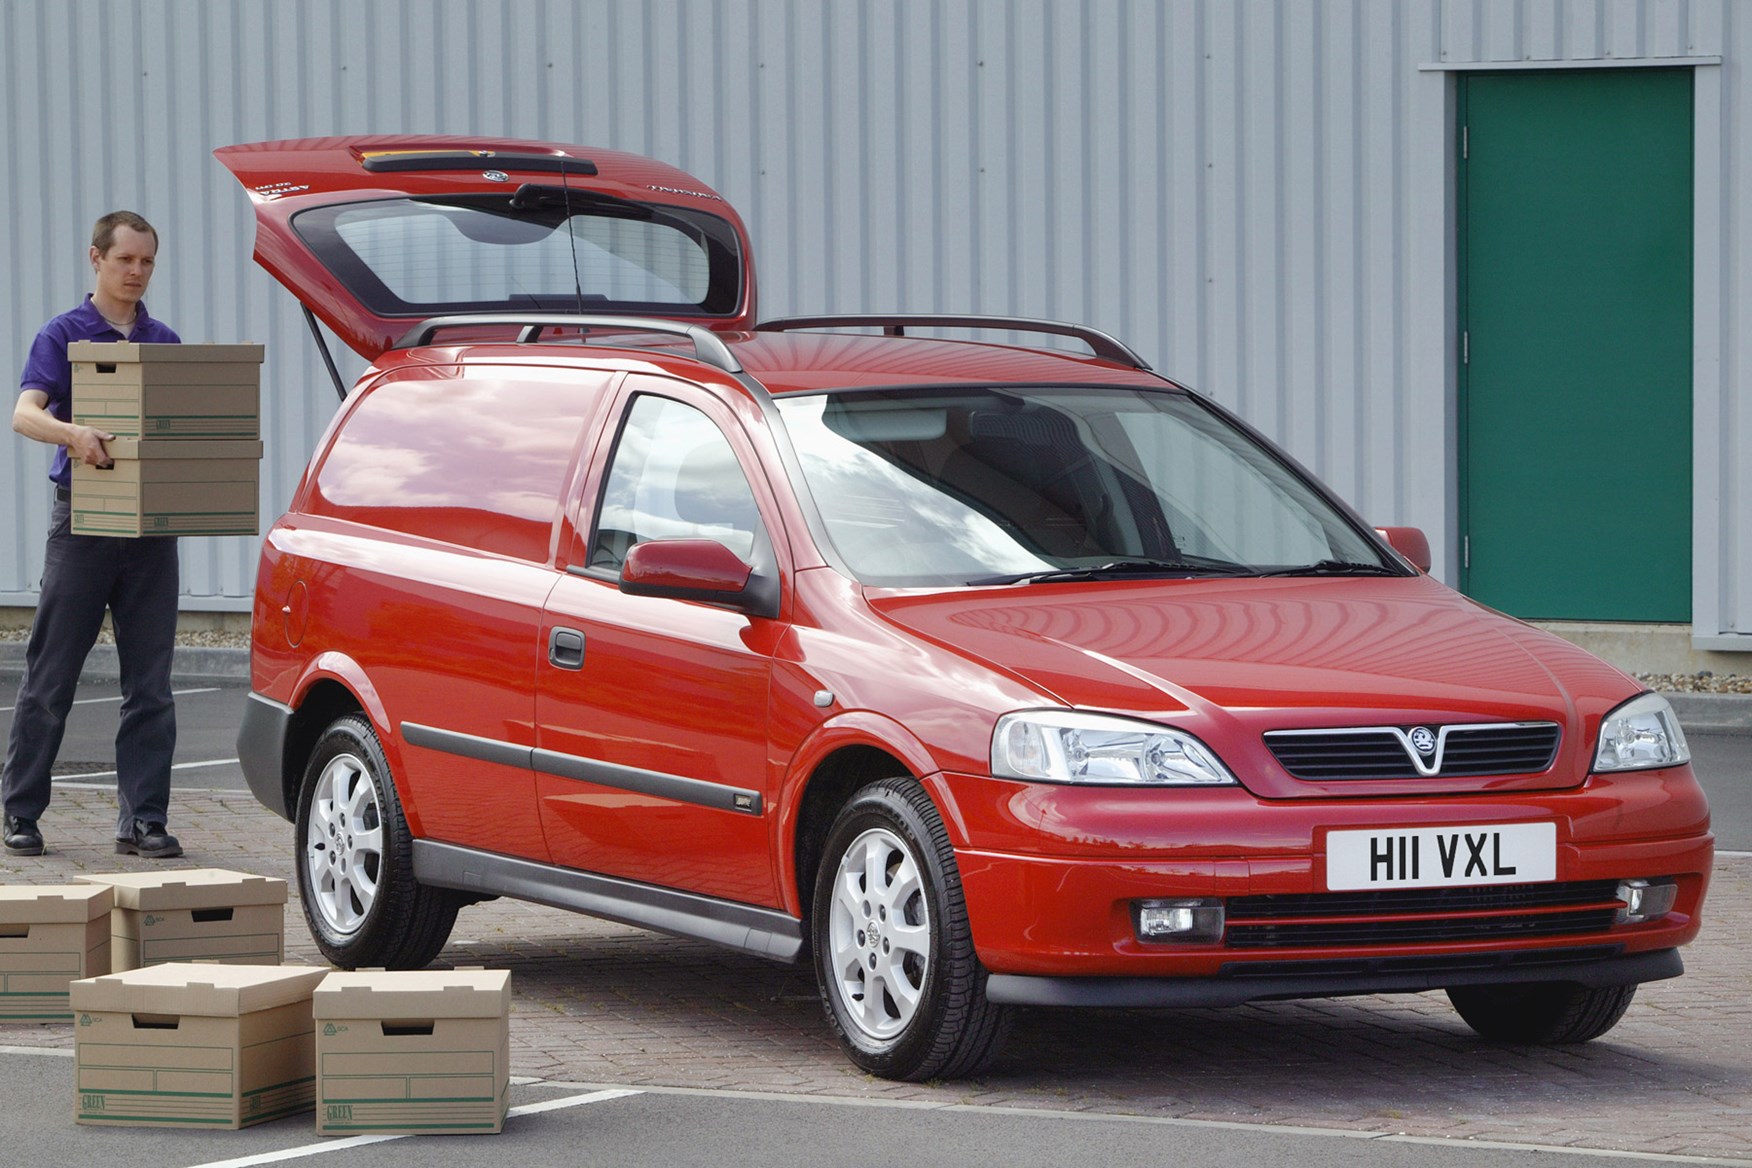 Vauxhall Astra review on Parkers Vans - load capabilties